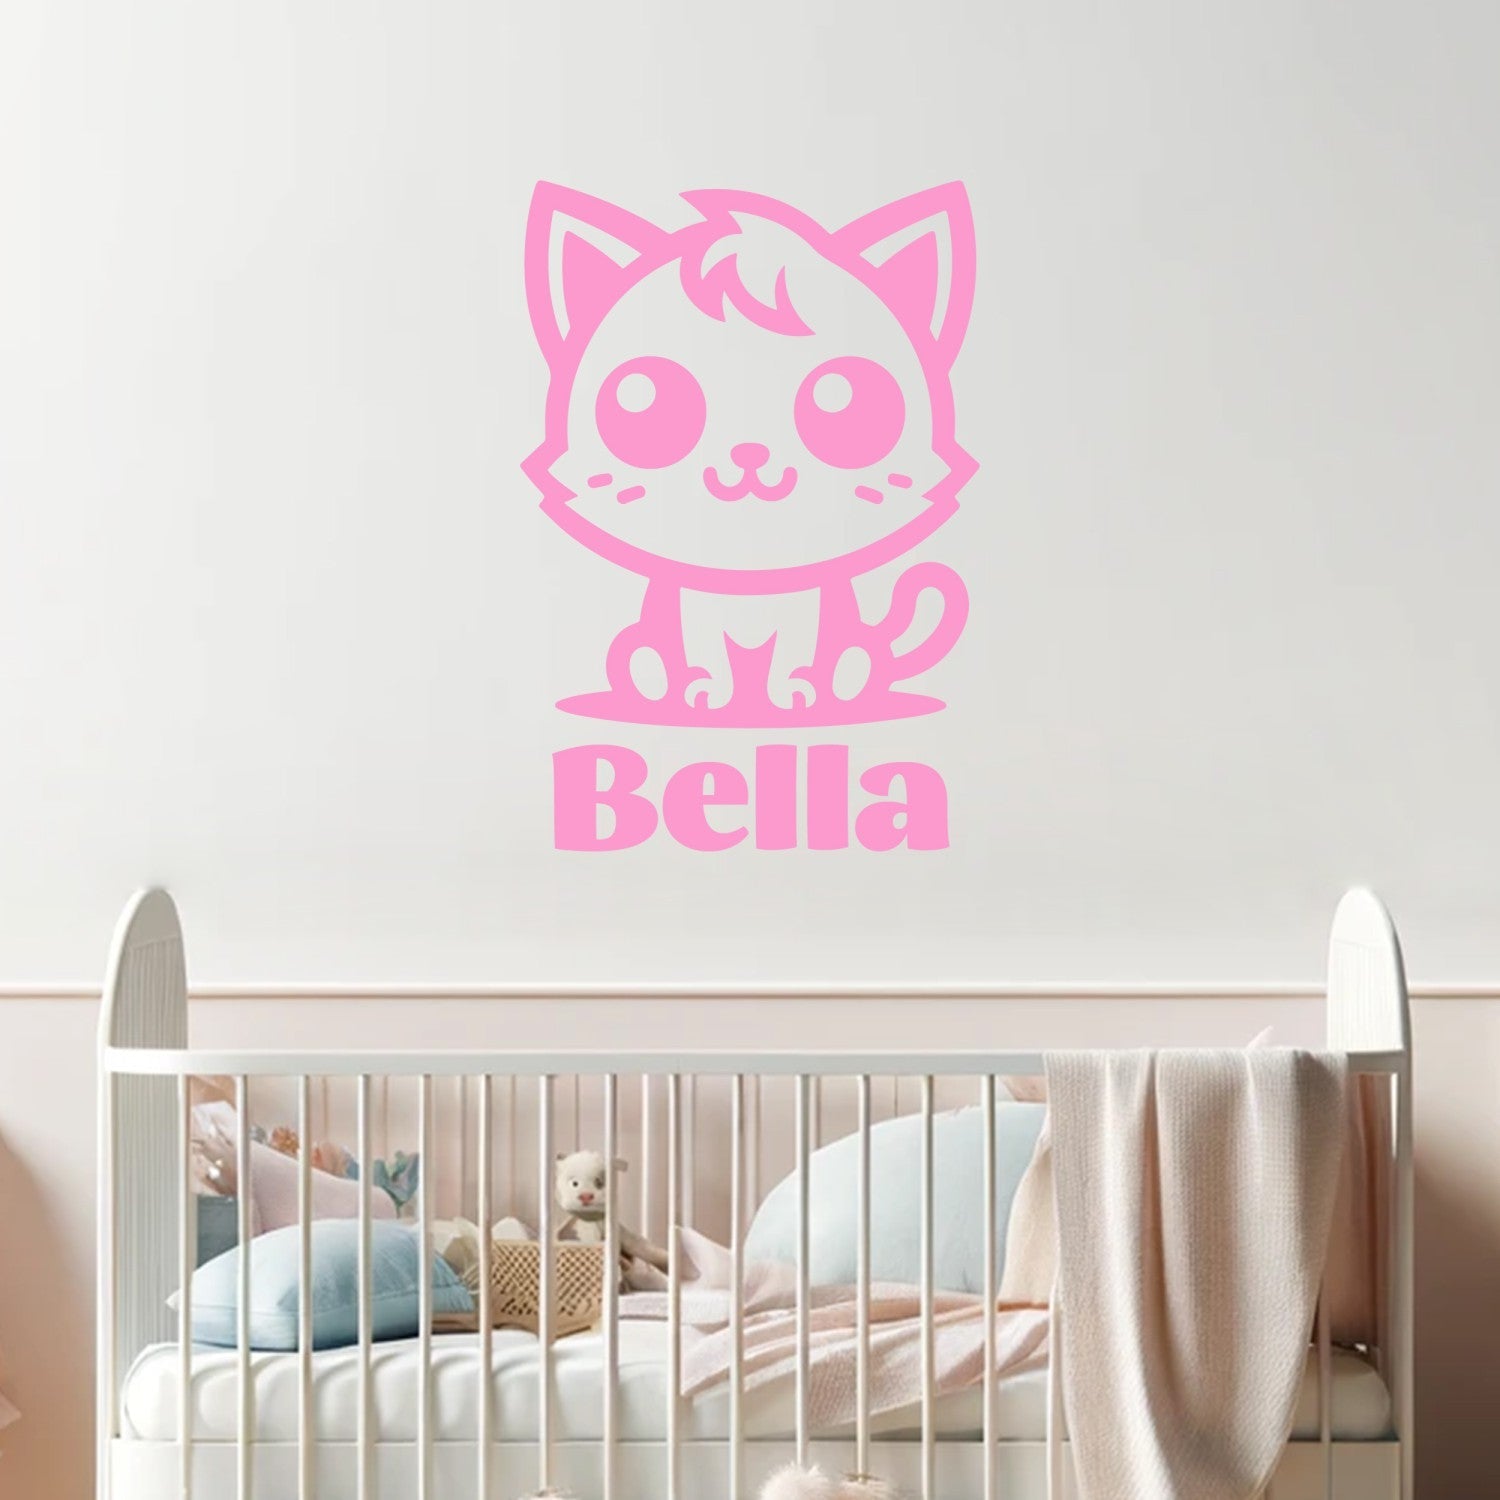 Koala Bear Wall Decals - Animal Wall Stickers with Custom Name - Personalized Wall Decal with Animals - Koala Animal Wall Decals 